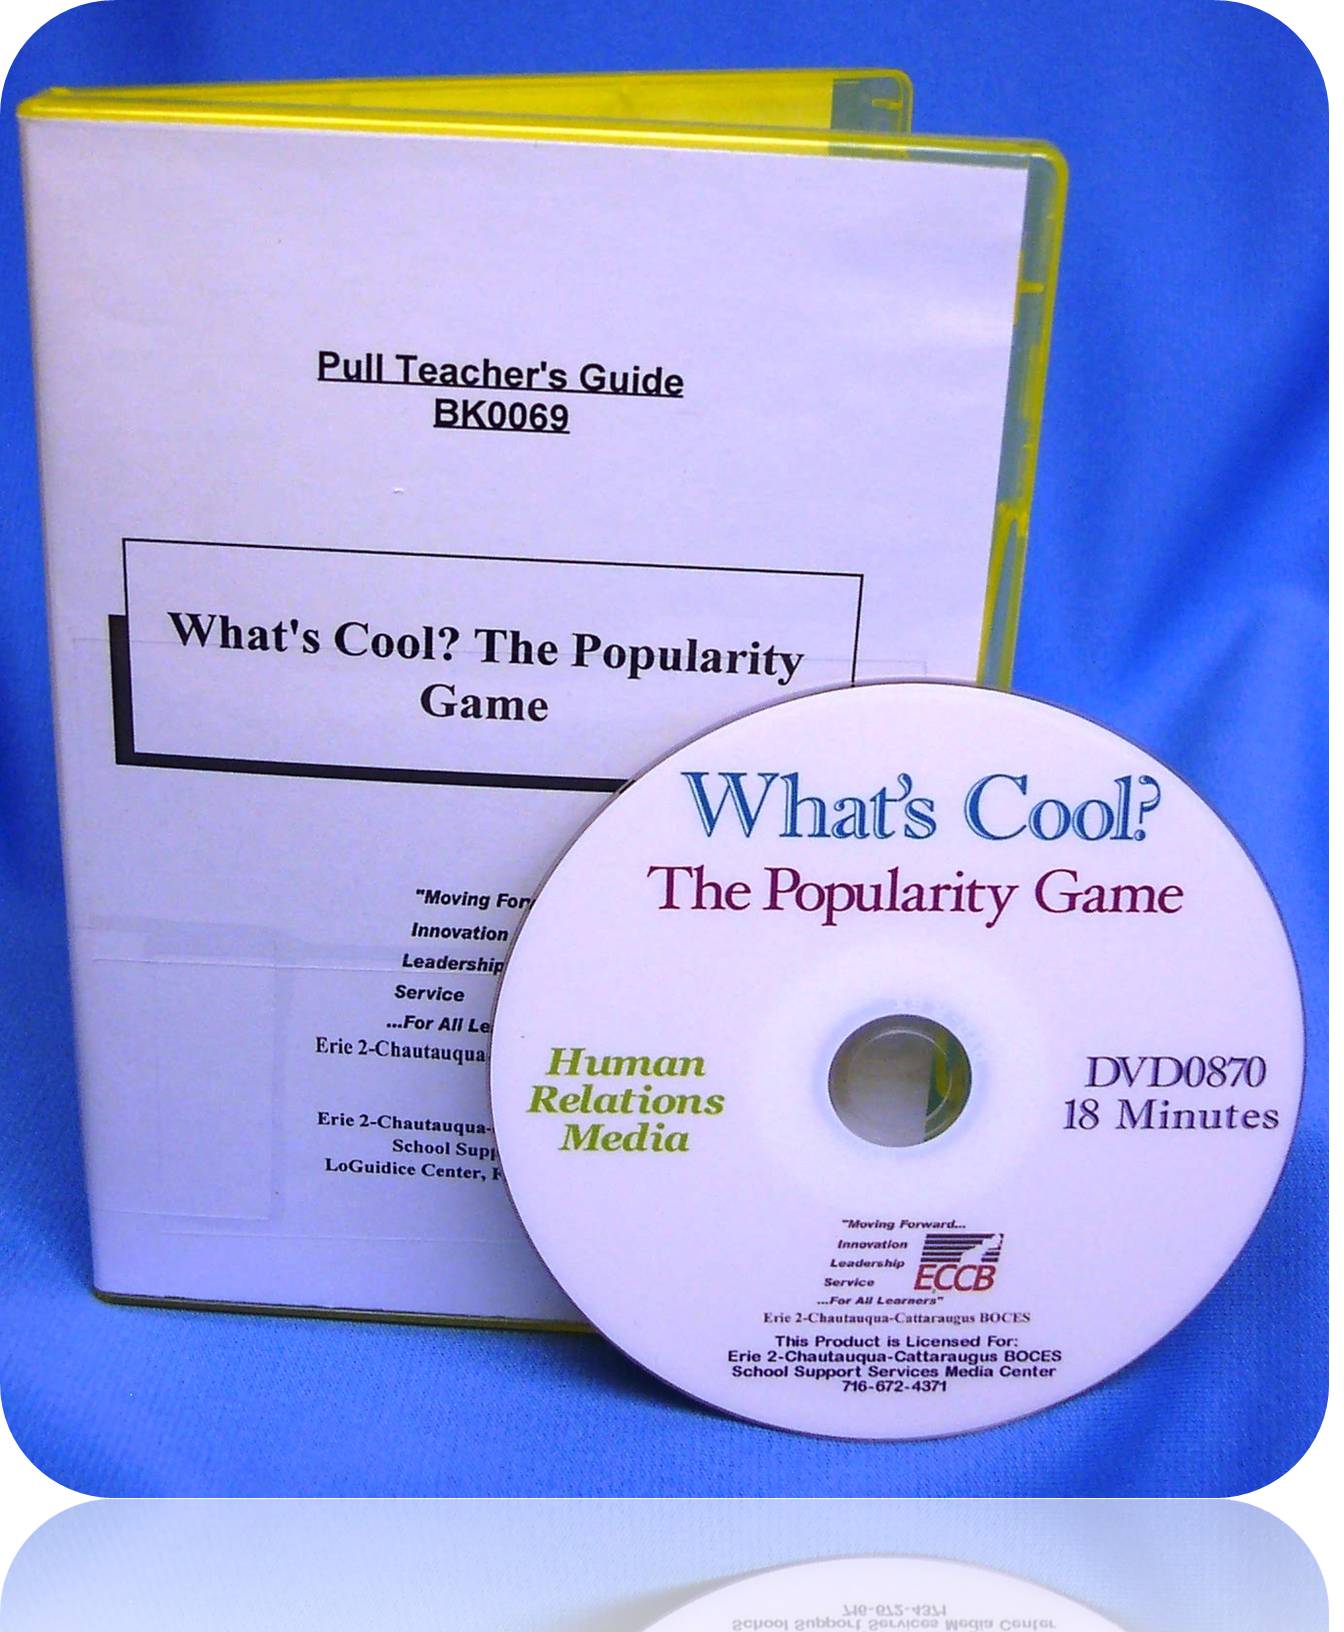 What's Cool? The Popularity Game